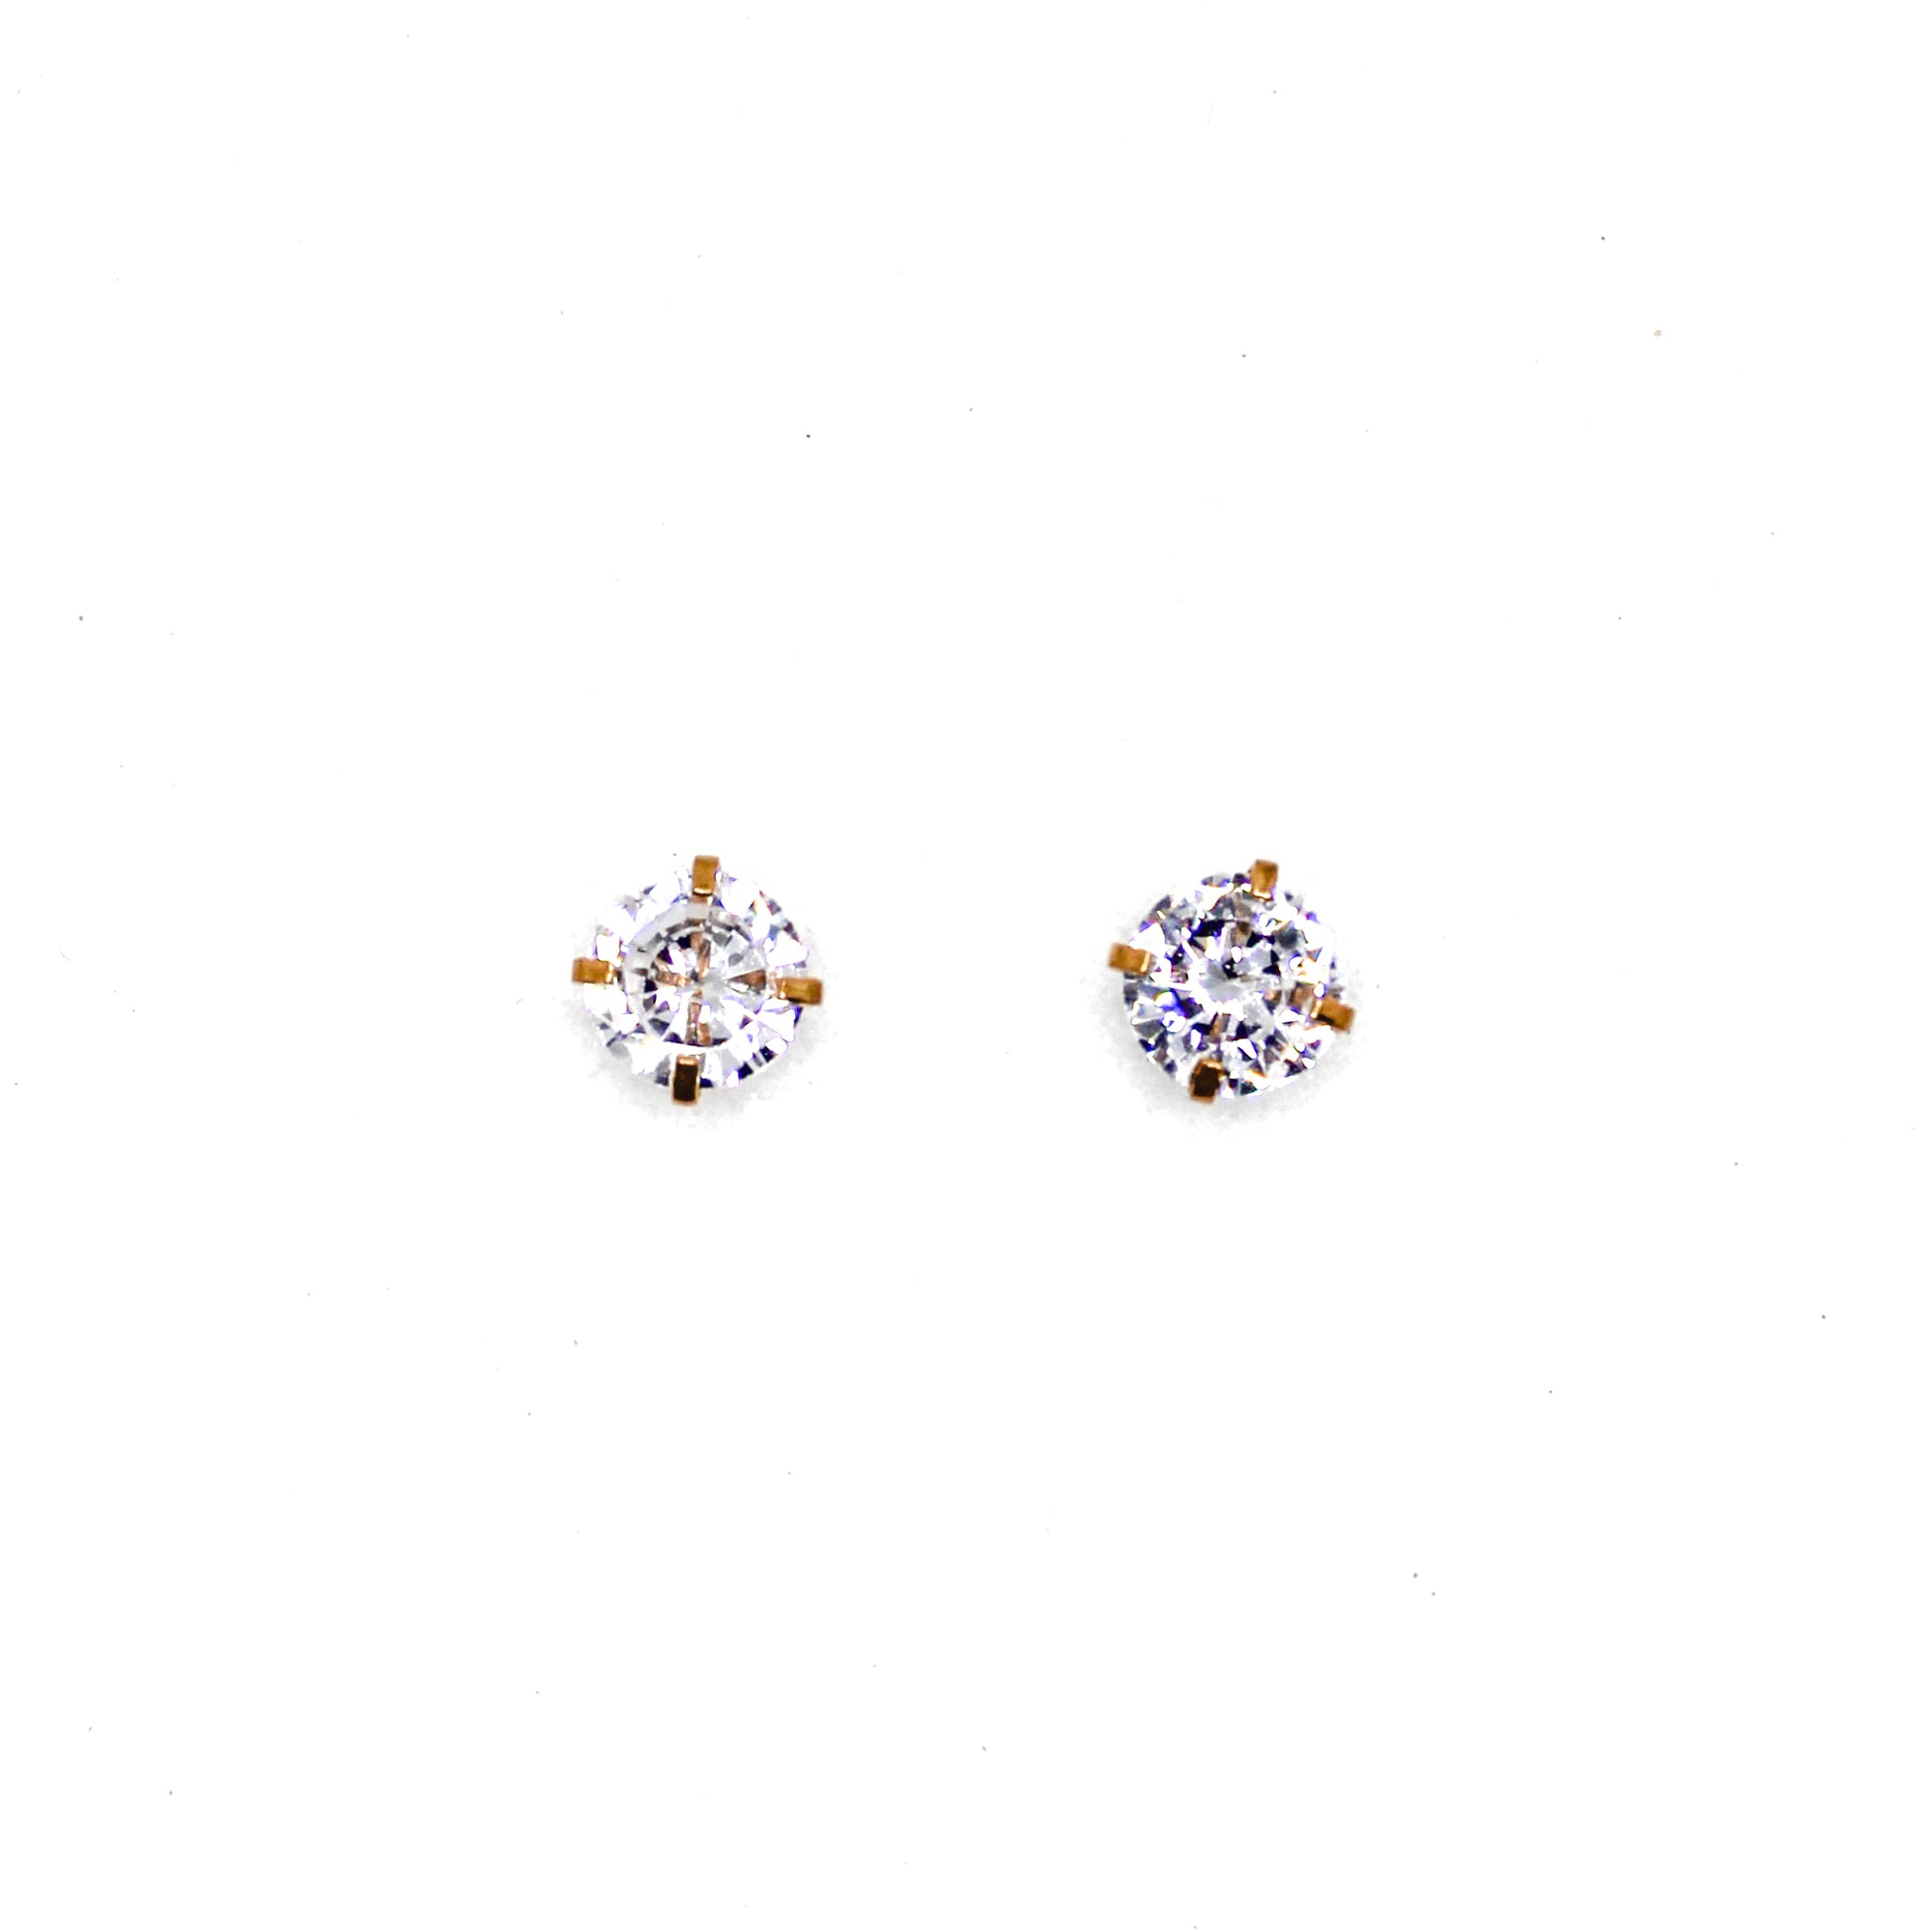 Everwear Studs - For the Girls Jewelry